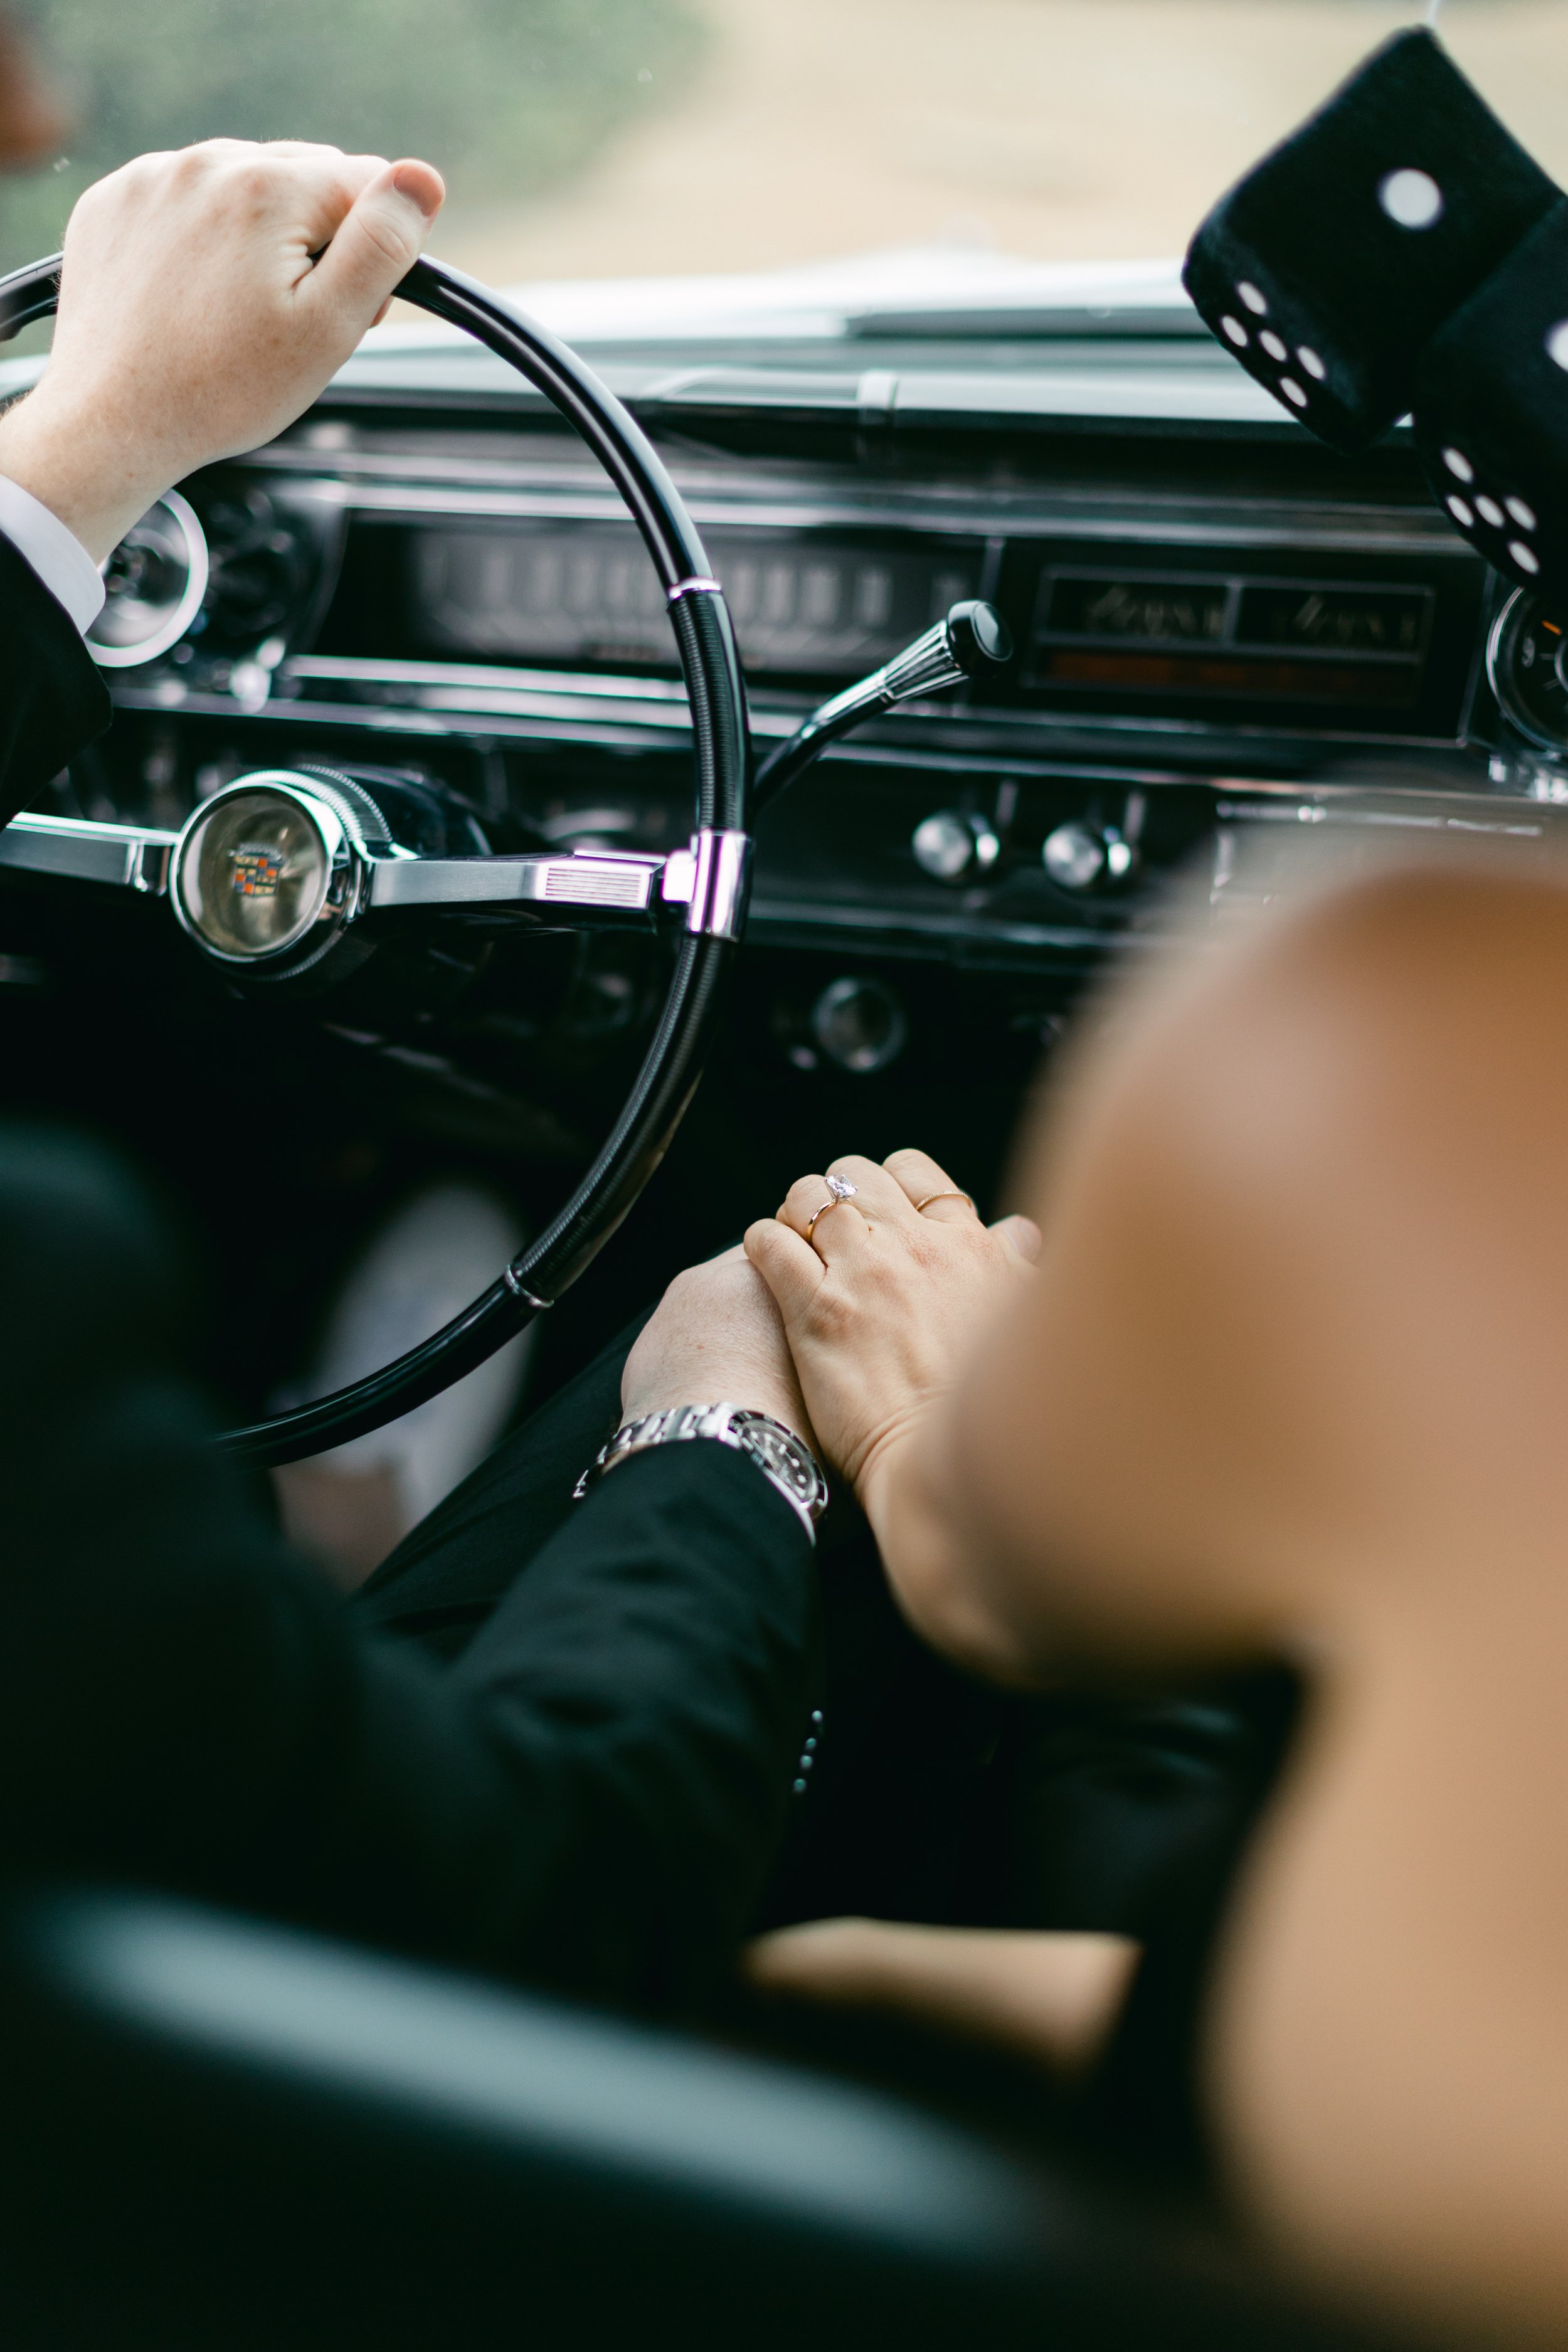 033_Engagament Gallery_©VanessaTierneyPhotography_Pacific Palisades Vintage Car Engagment Session_©Vanessa Tierney Photography_VTP23946.jpg